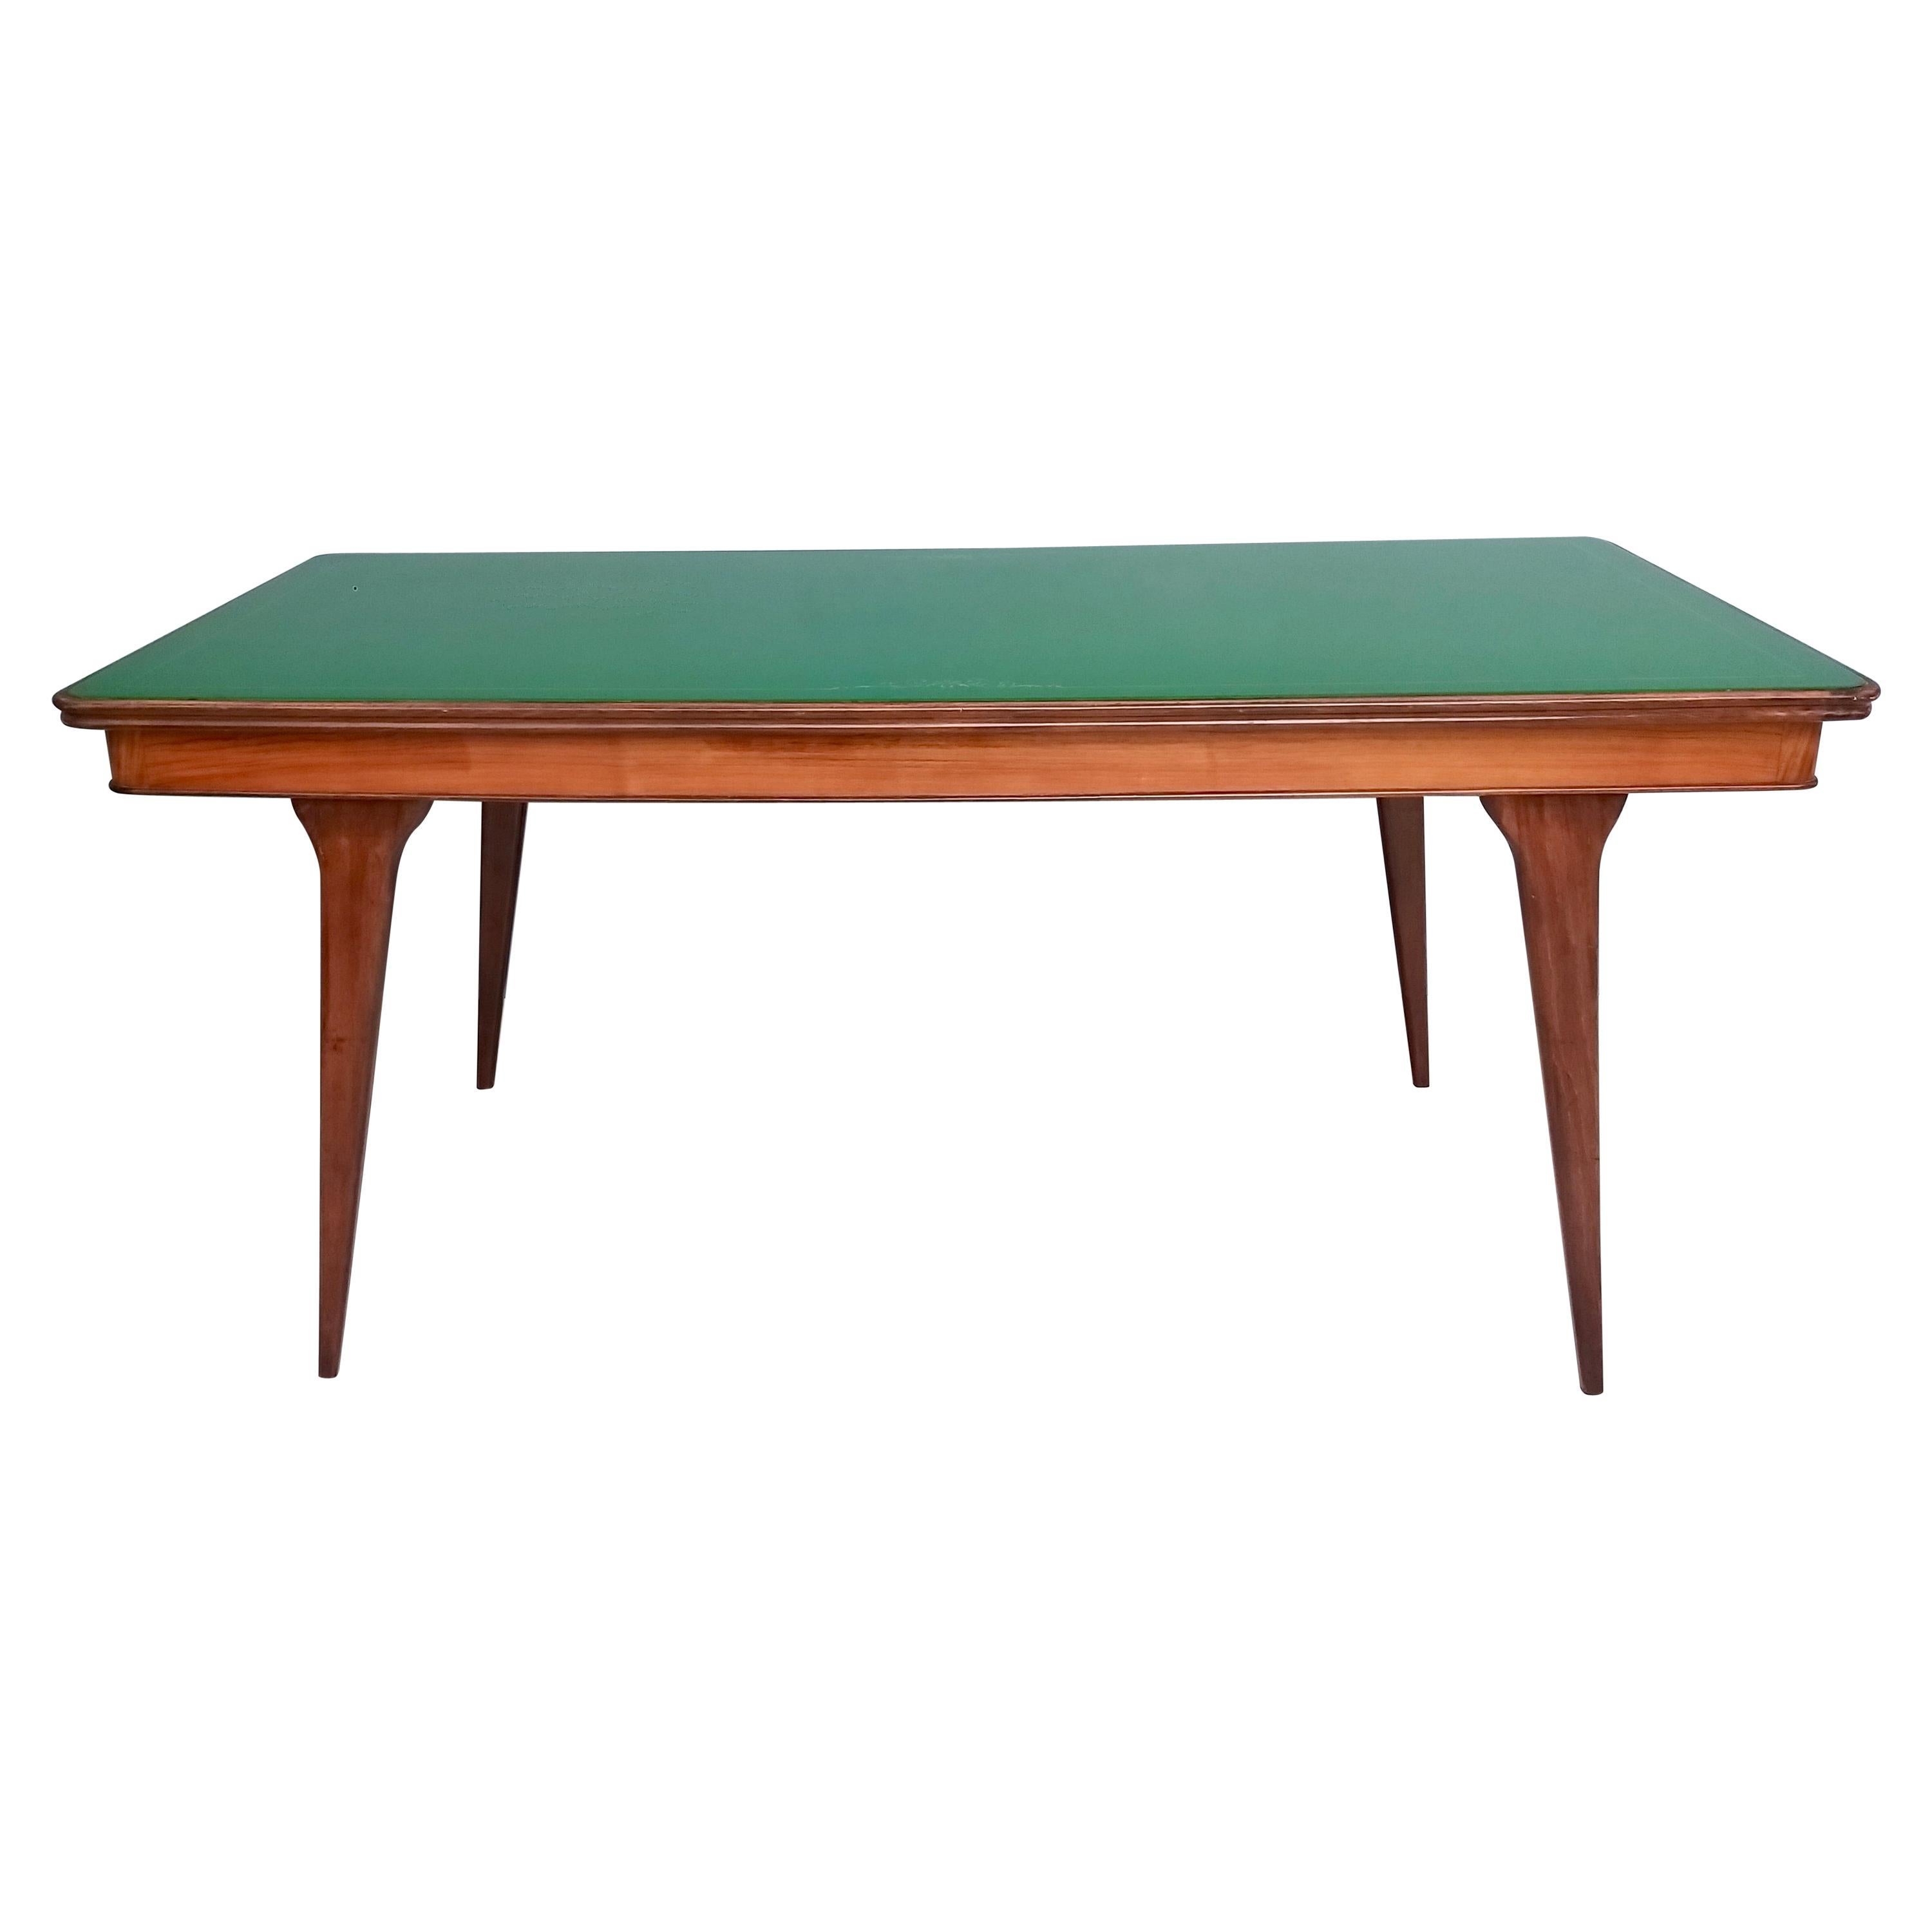 Vintage Ebonized Beech and Walnut Dining Table with a Green Glass Top, Italy